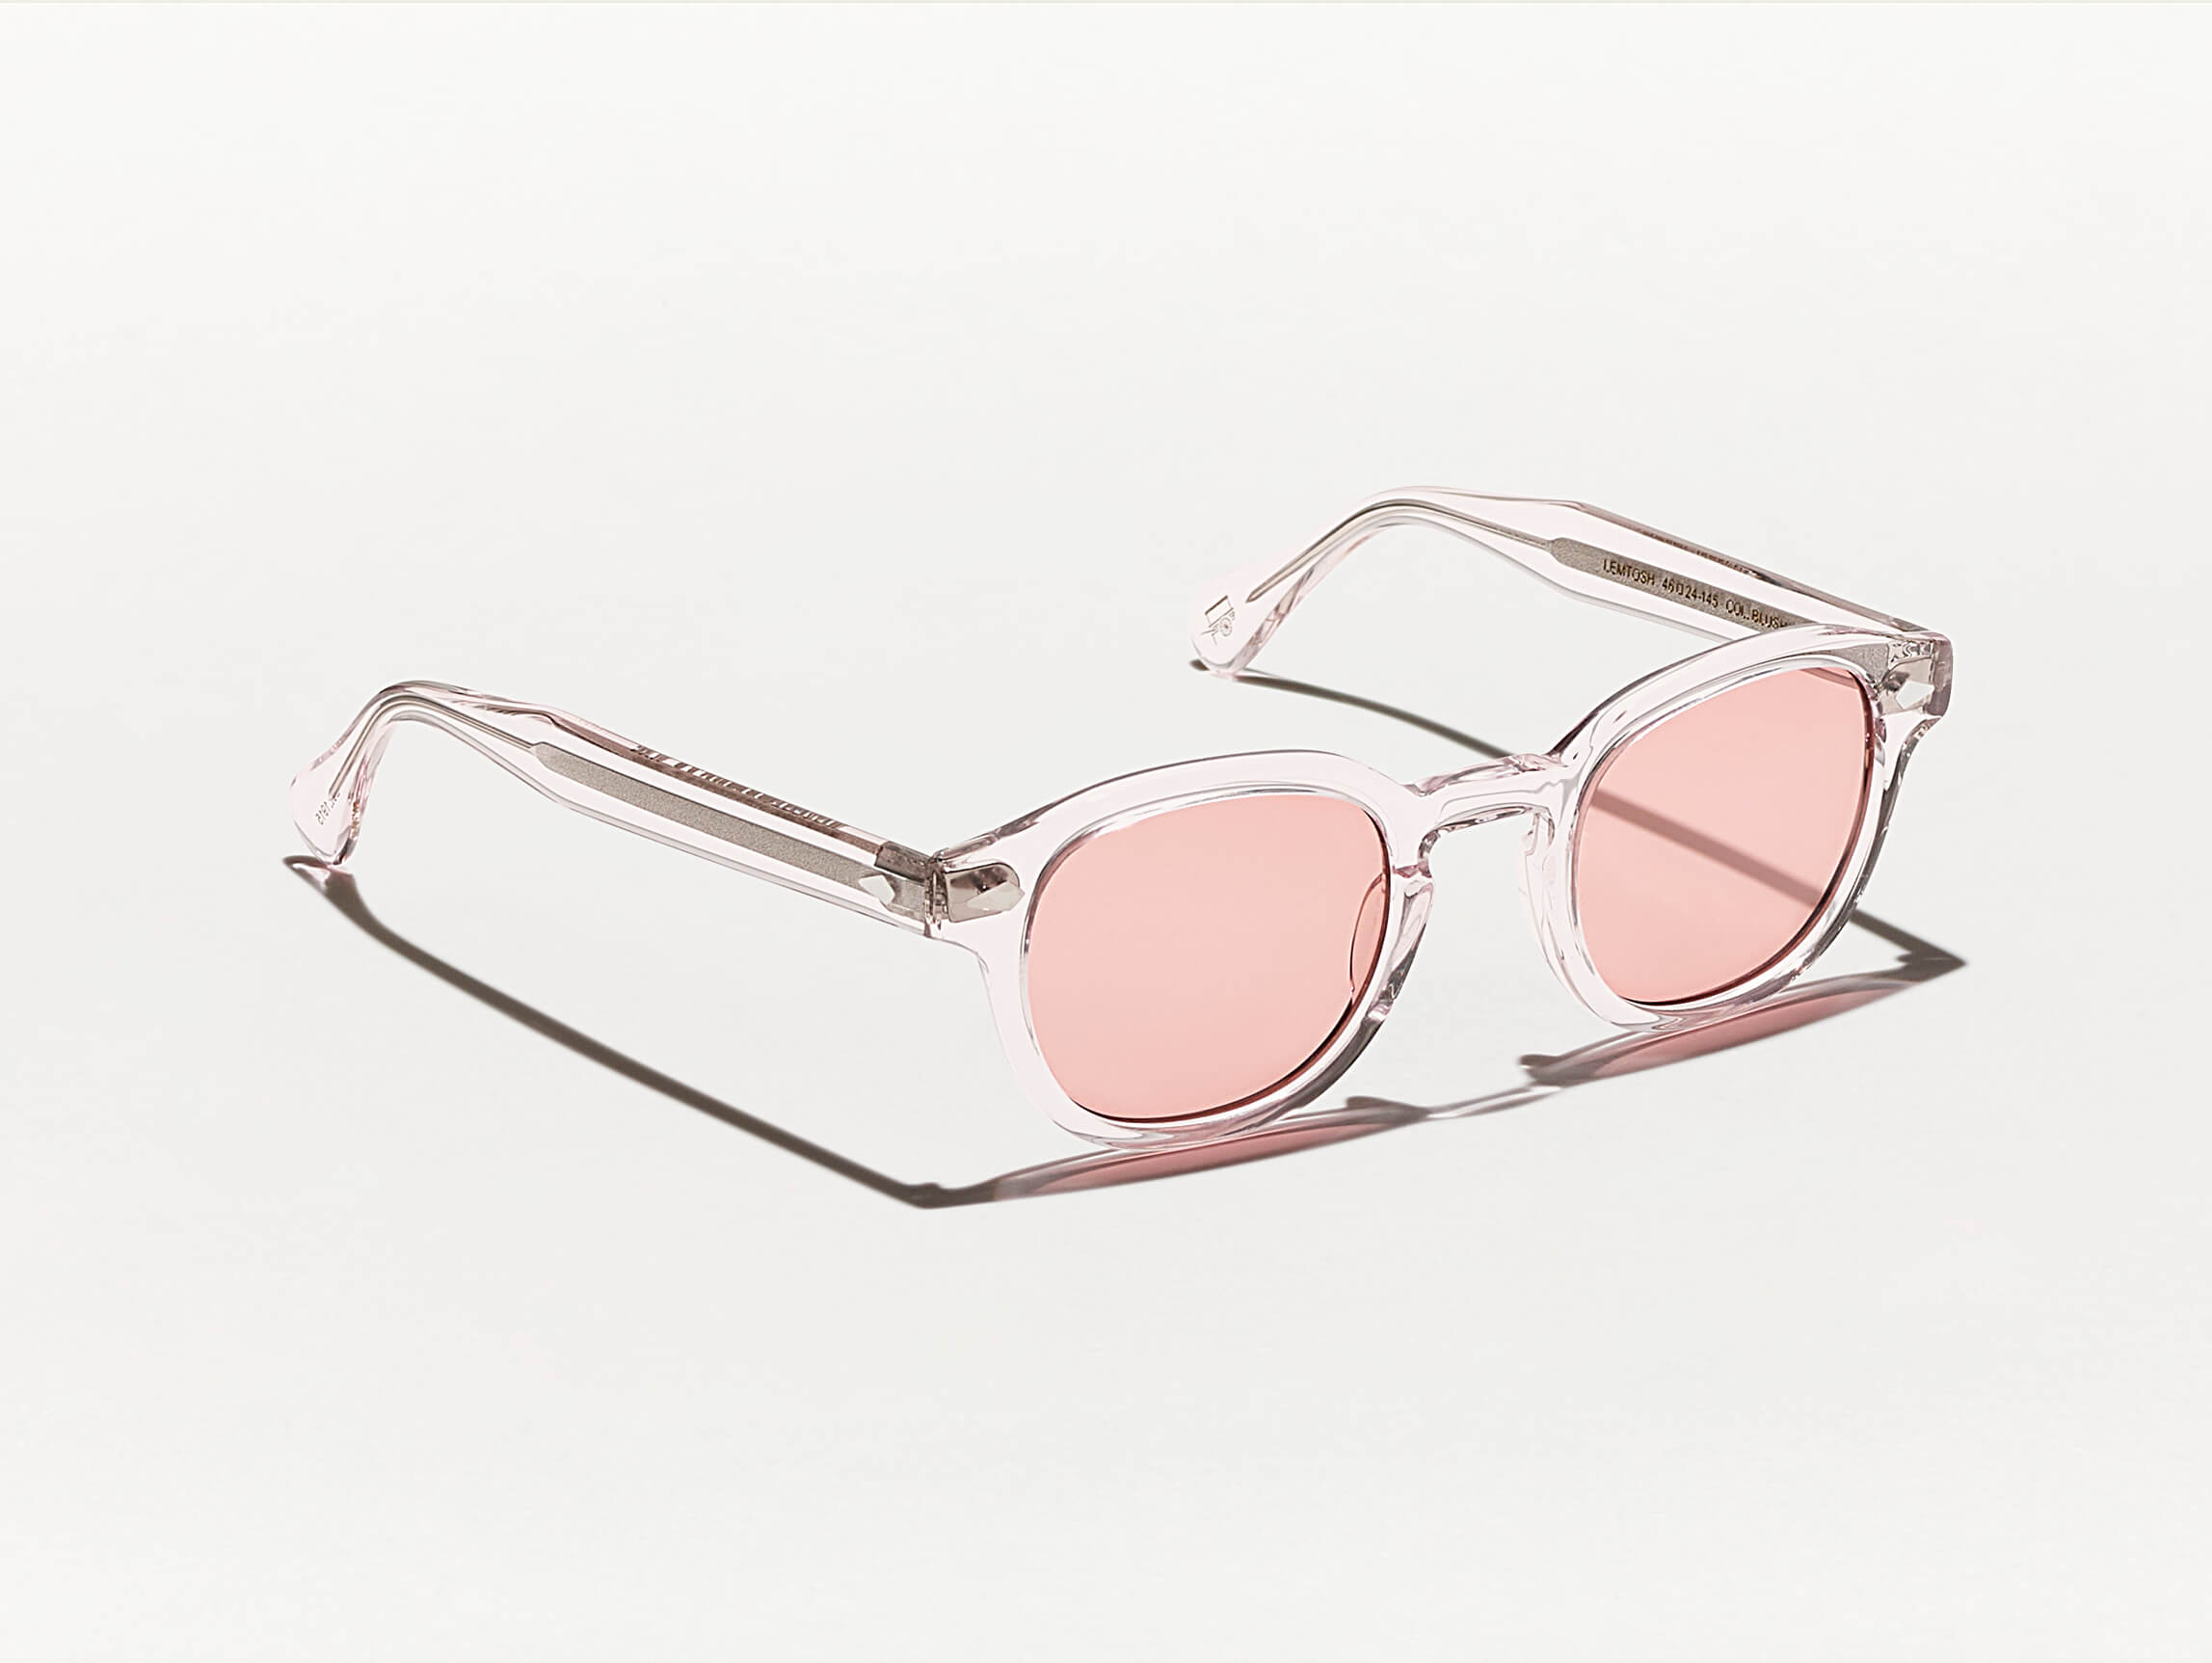 The LEMTOSH in Blush with New York Rose Tinted Lenses